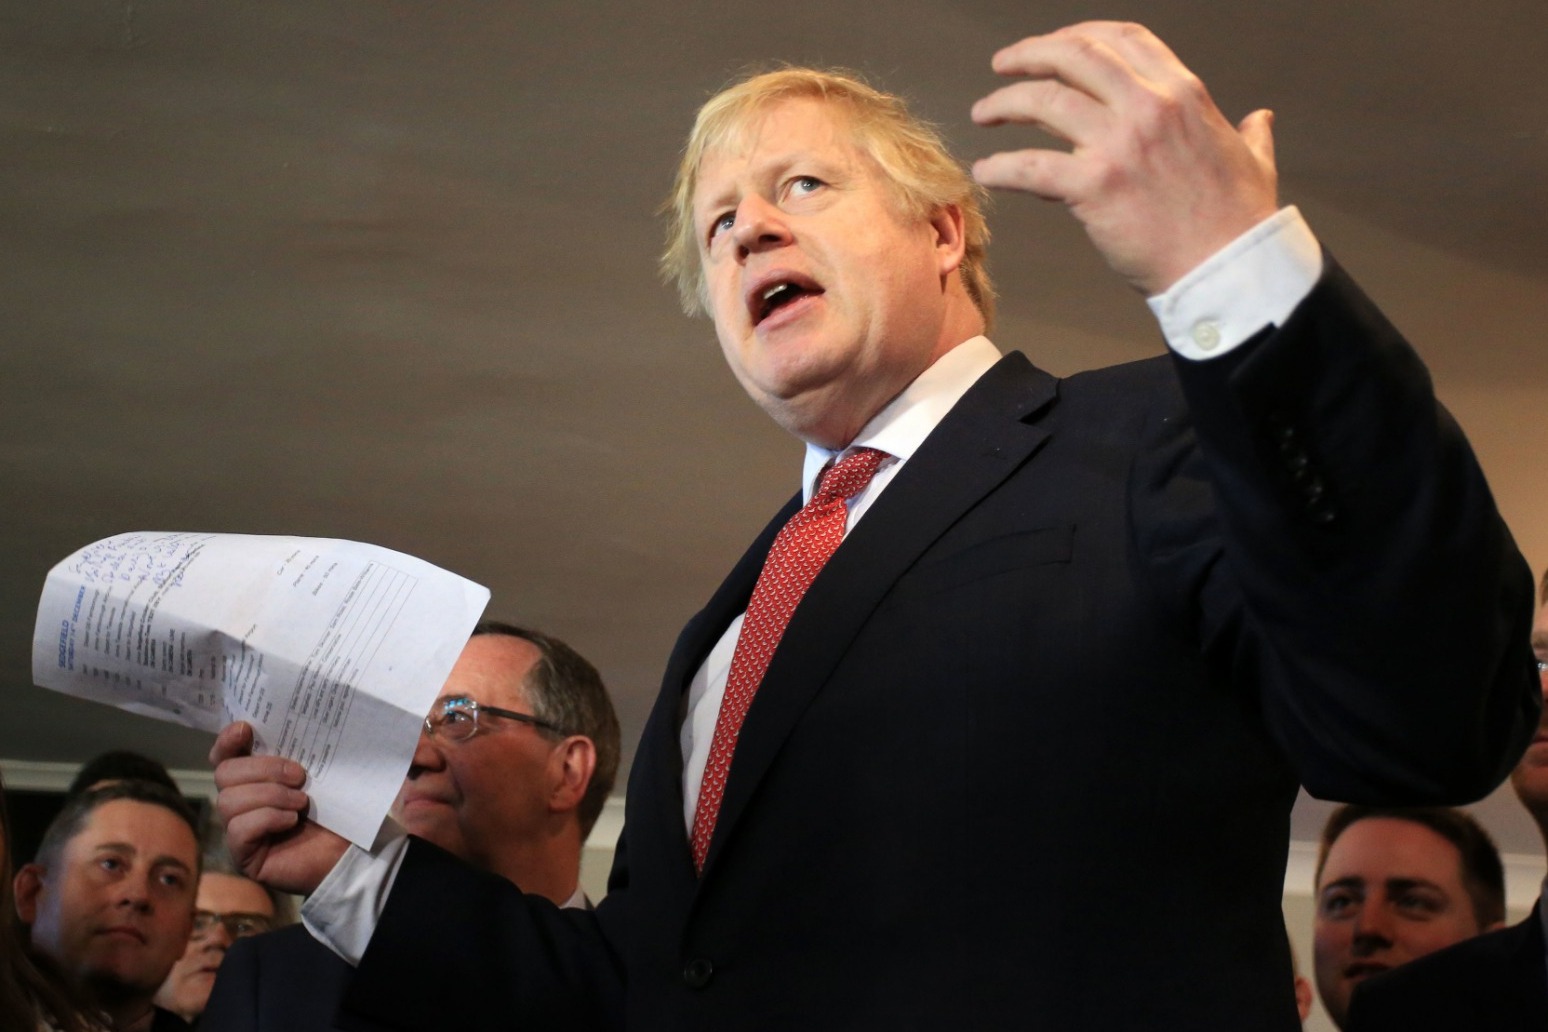 JOHNSON VOWS TO REPAY TRUST OF VOTERS WHO TURNED FROM RED TO BLUE 